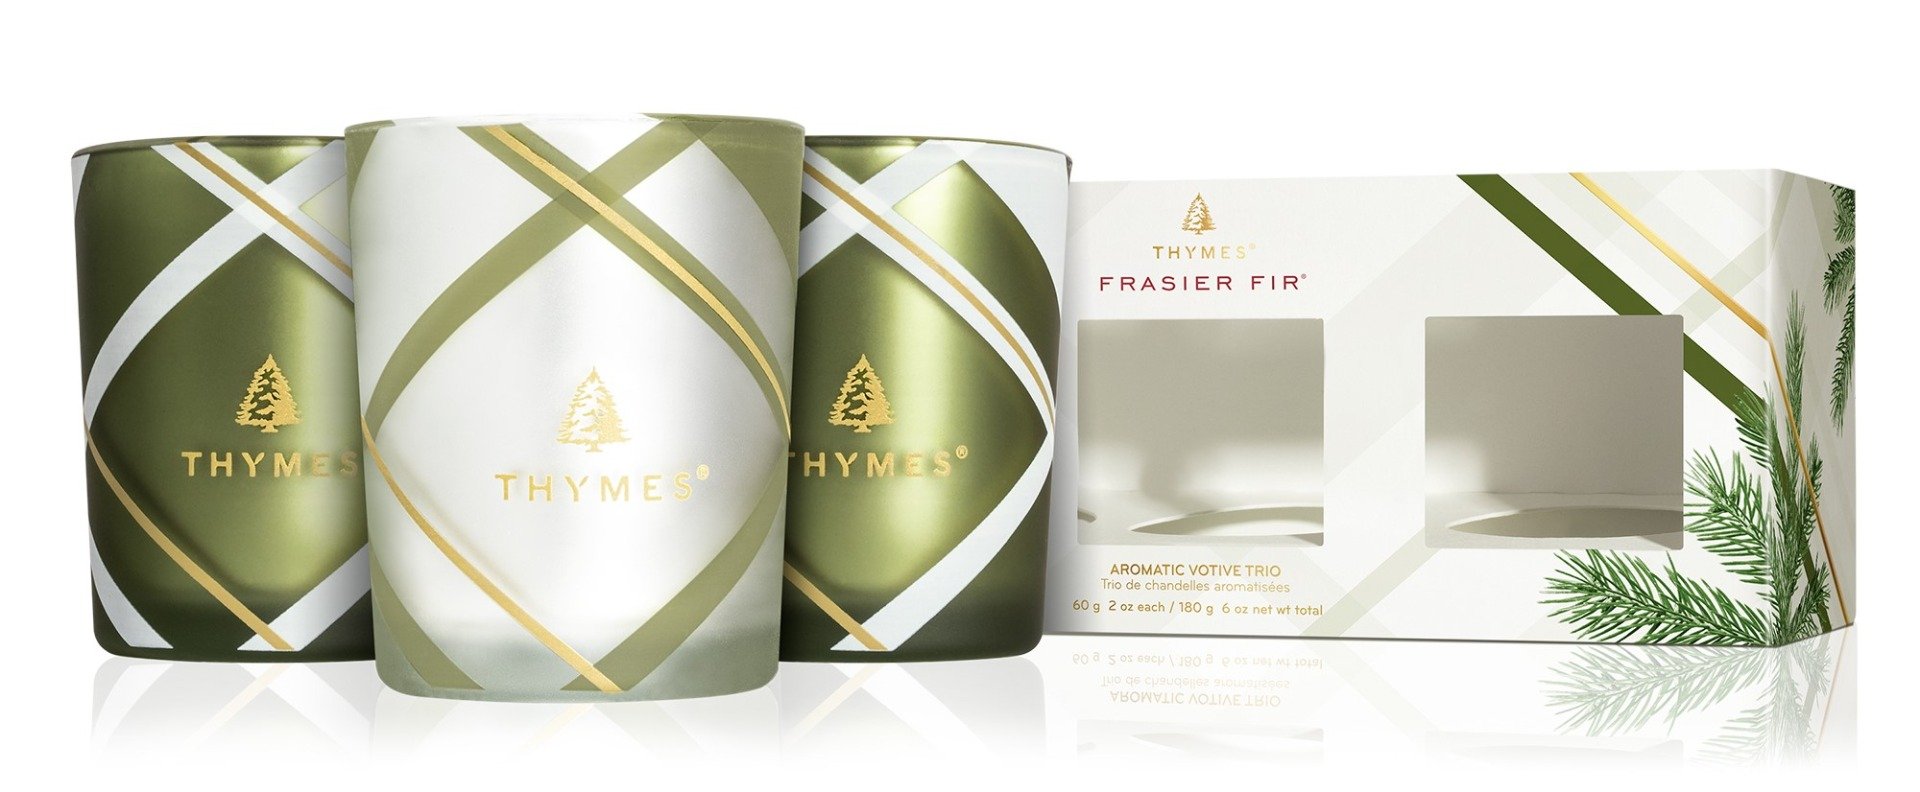 Frasier Fir Frosted Plaid Votive Trio Candle Set